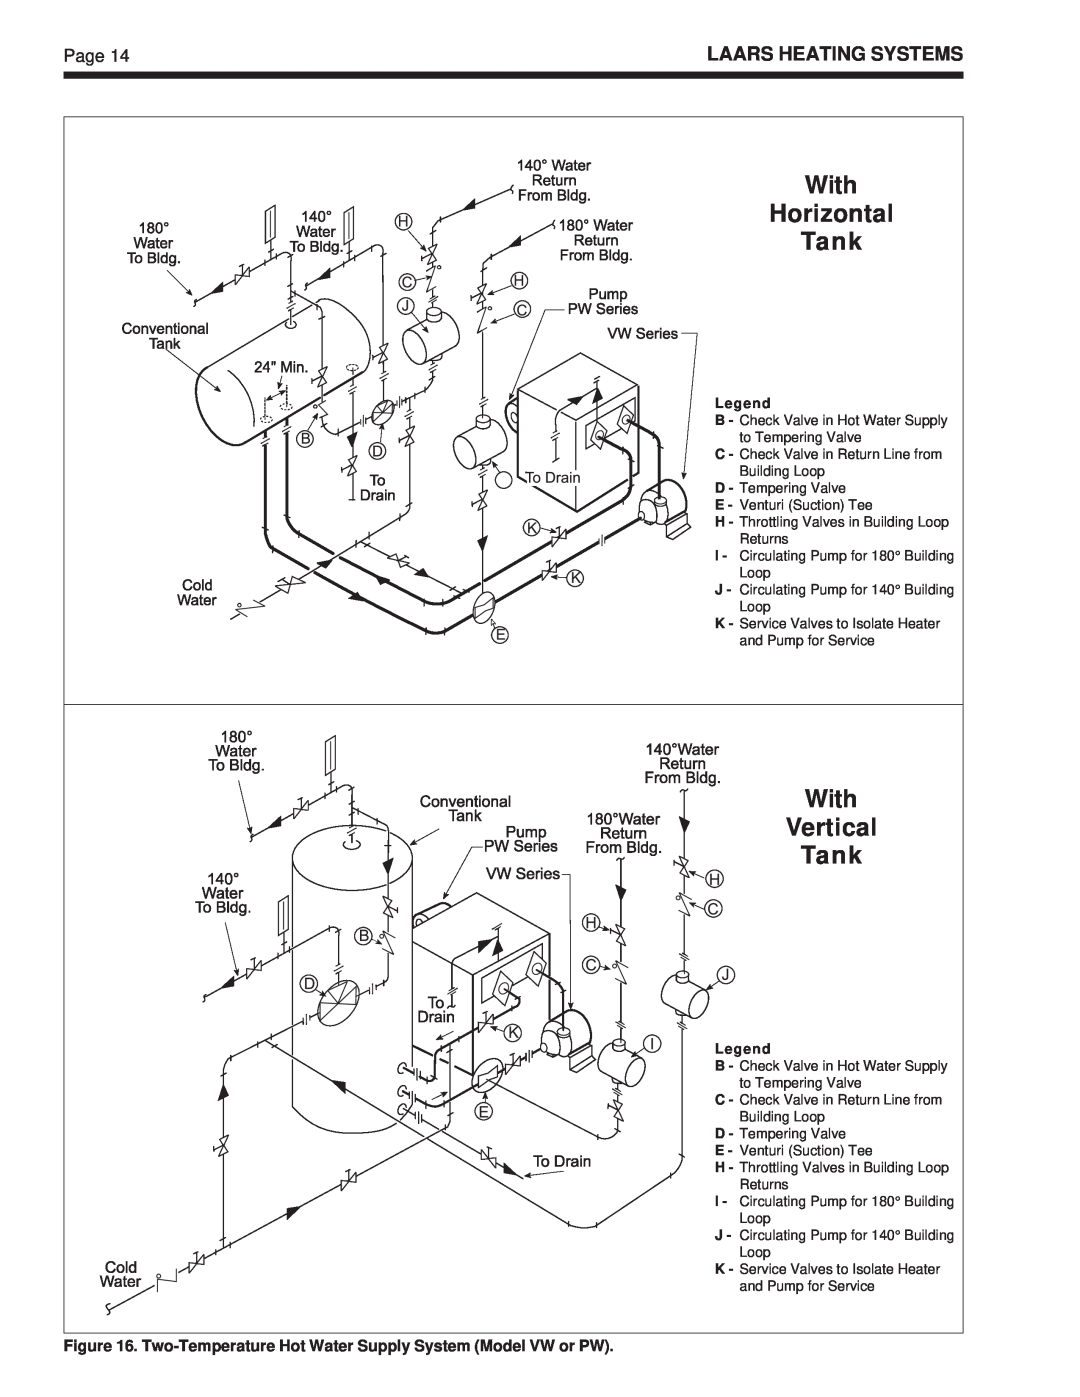 Laarsen Associates VW, PW, IW warranty With Horizontal Tank, With Vertical Tank, Laars Heating Systems 